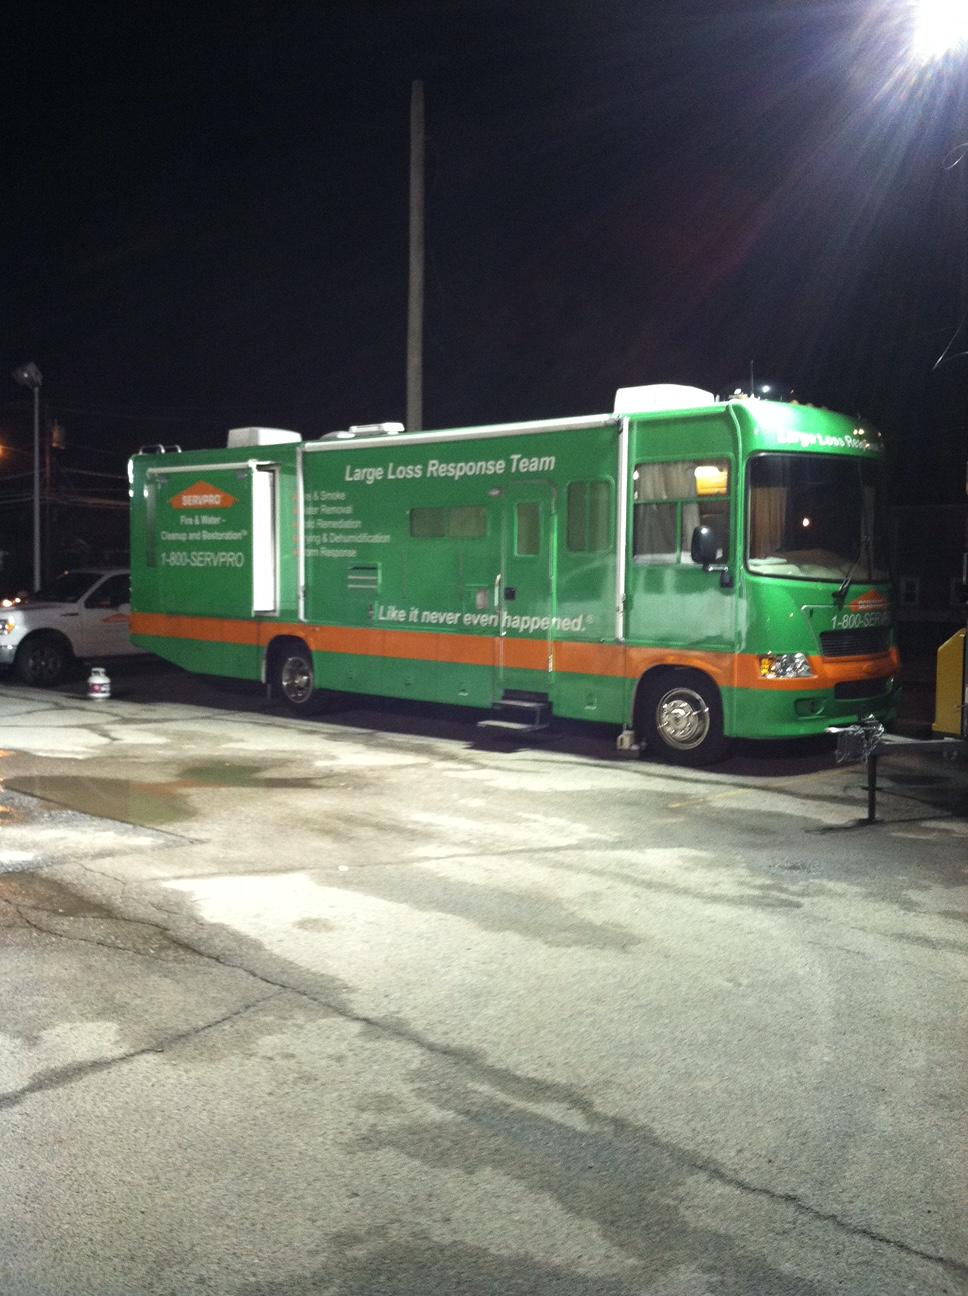 No matter the hour, SERVPRO of Providence is ALWAYS ready to respond!